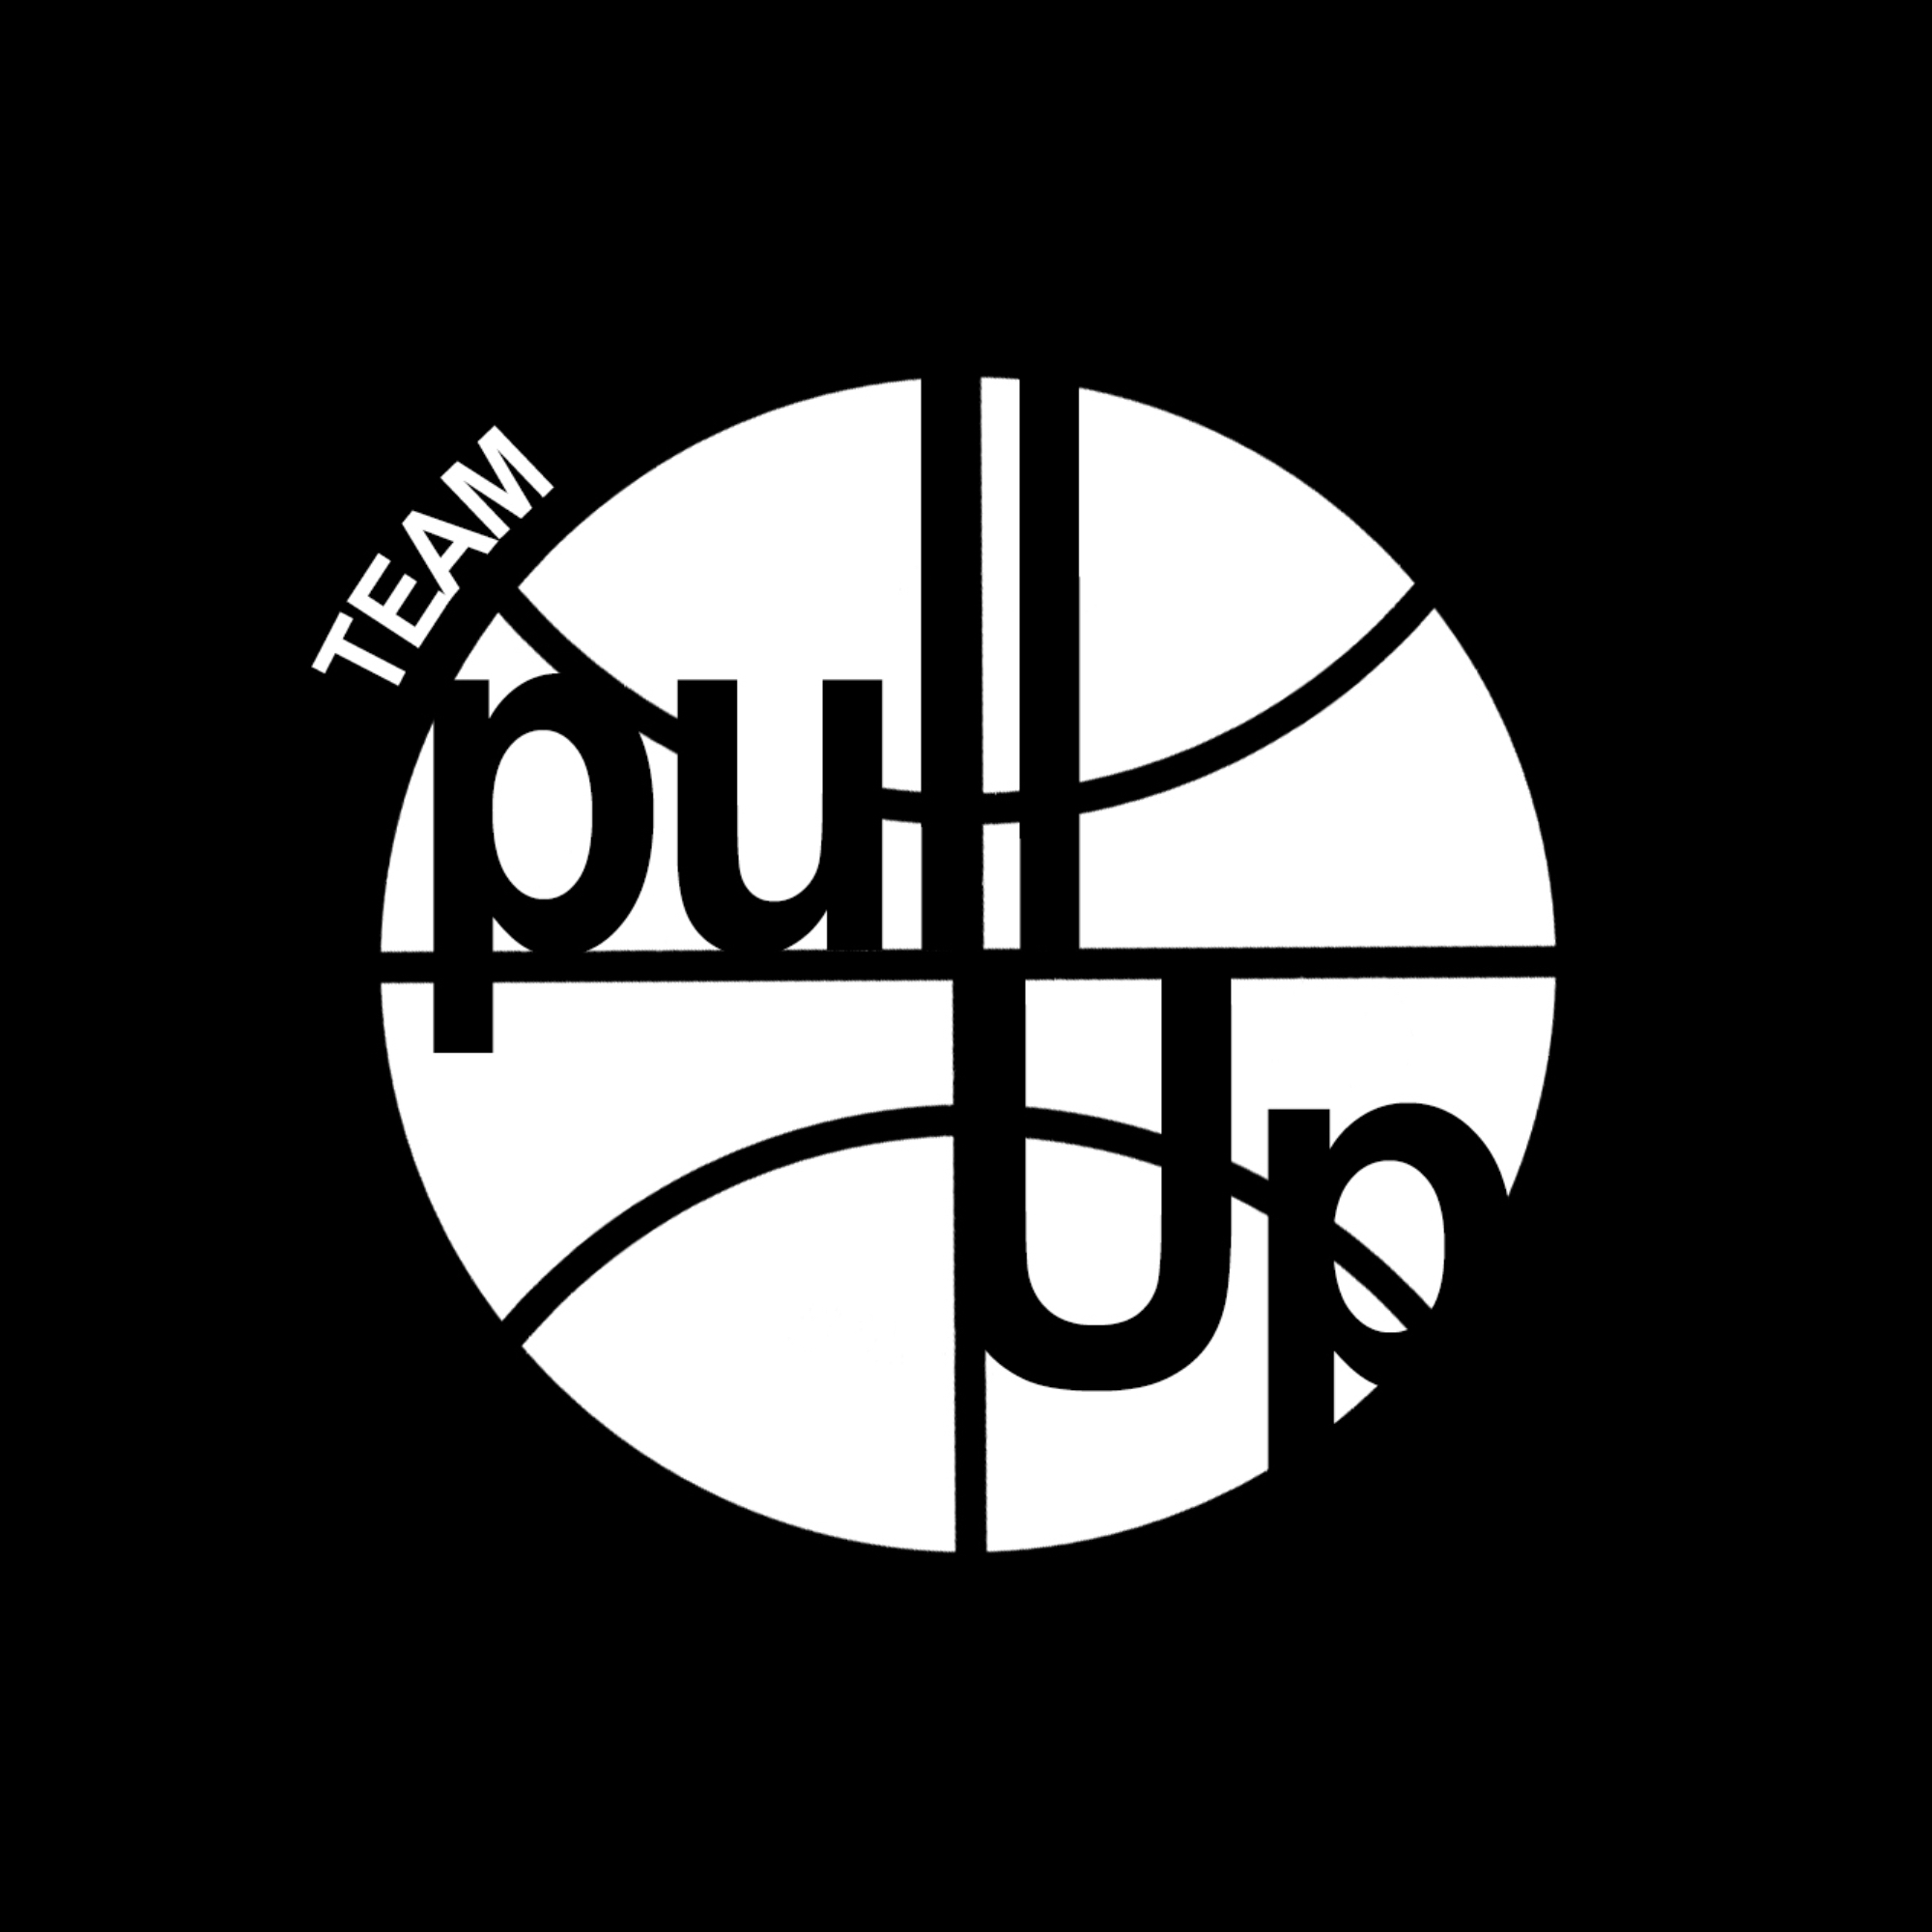 The official logo of Team Pull-Up